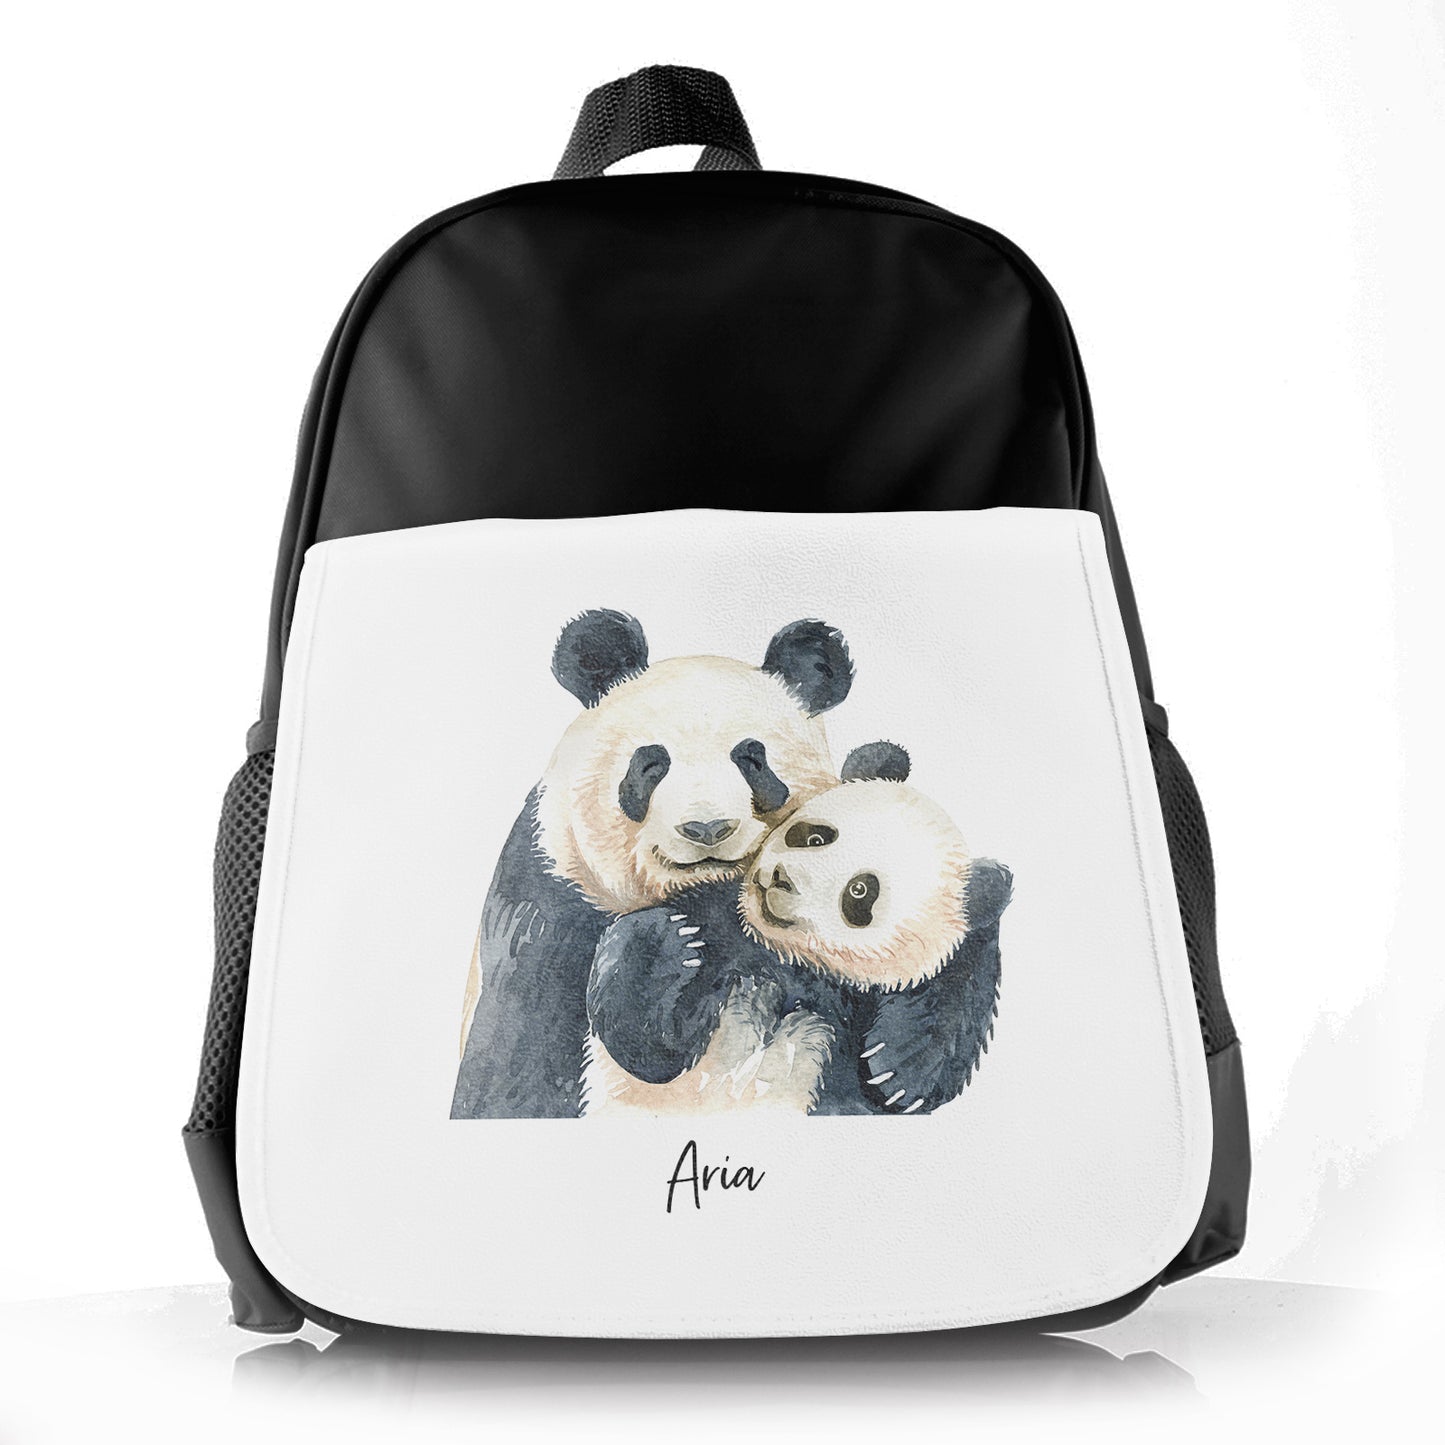 Personalised School Bag with Welcoming Text and Embracing Mum and Baby Pandas